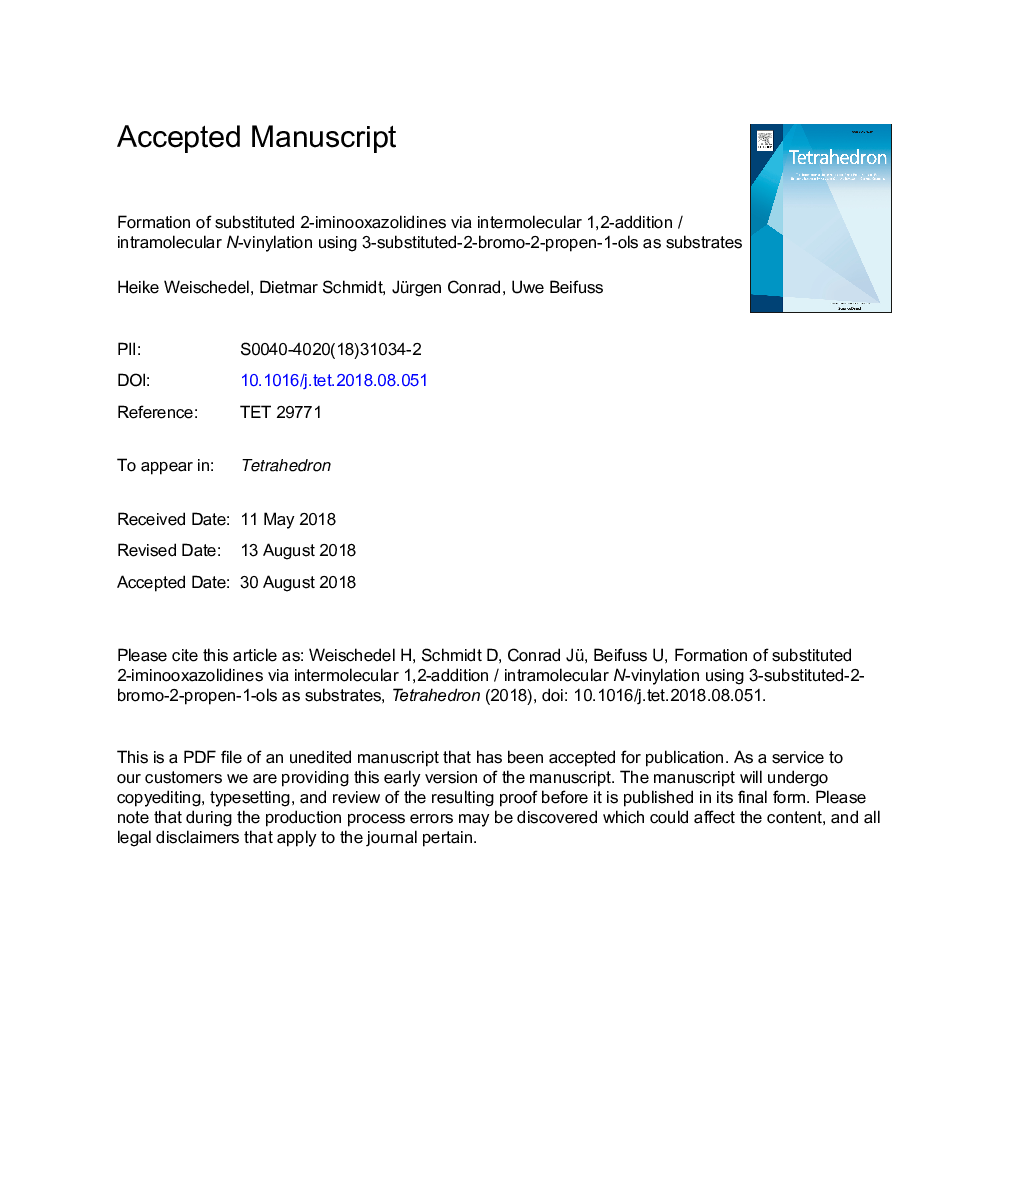 Formation of substituted 2-iminooxazolidines via intermolecular 1,2-addition/intramolecular N-vinylation using 3-substituted-2-bromo-2-propen-1-ols as substrates